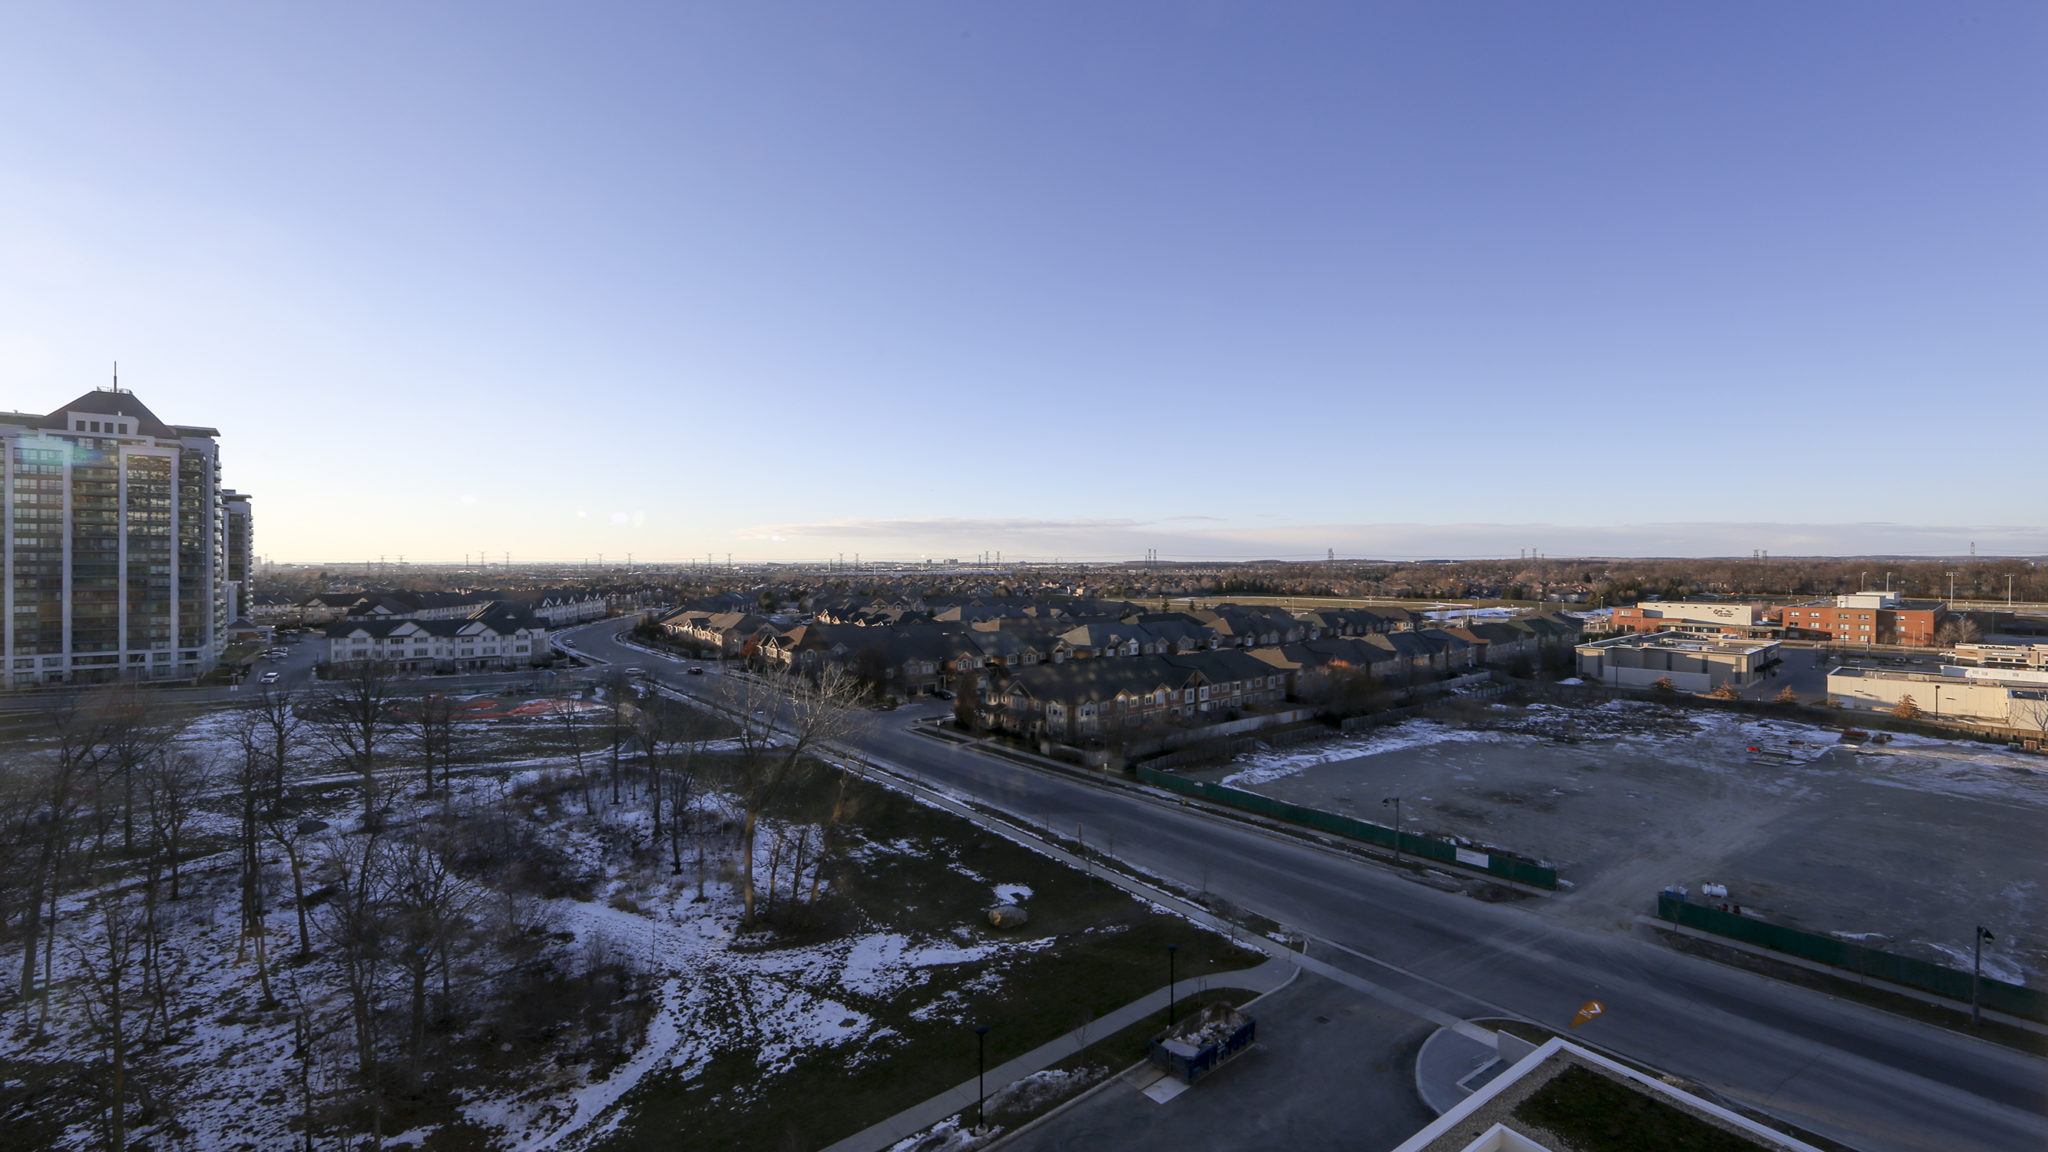 Sky view of Thornhill and its houses and roads.